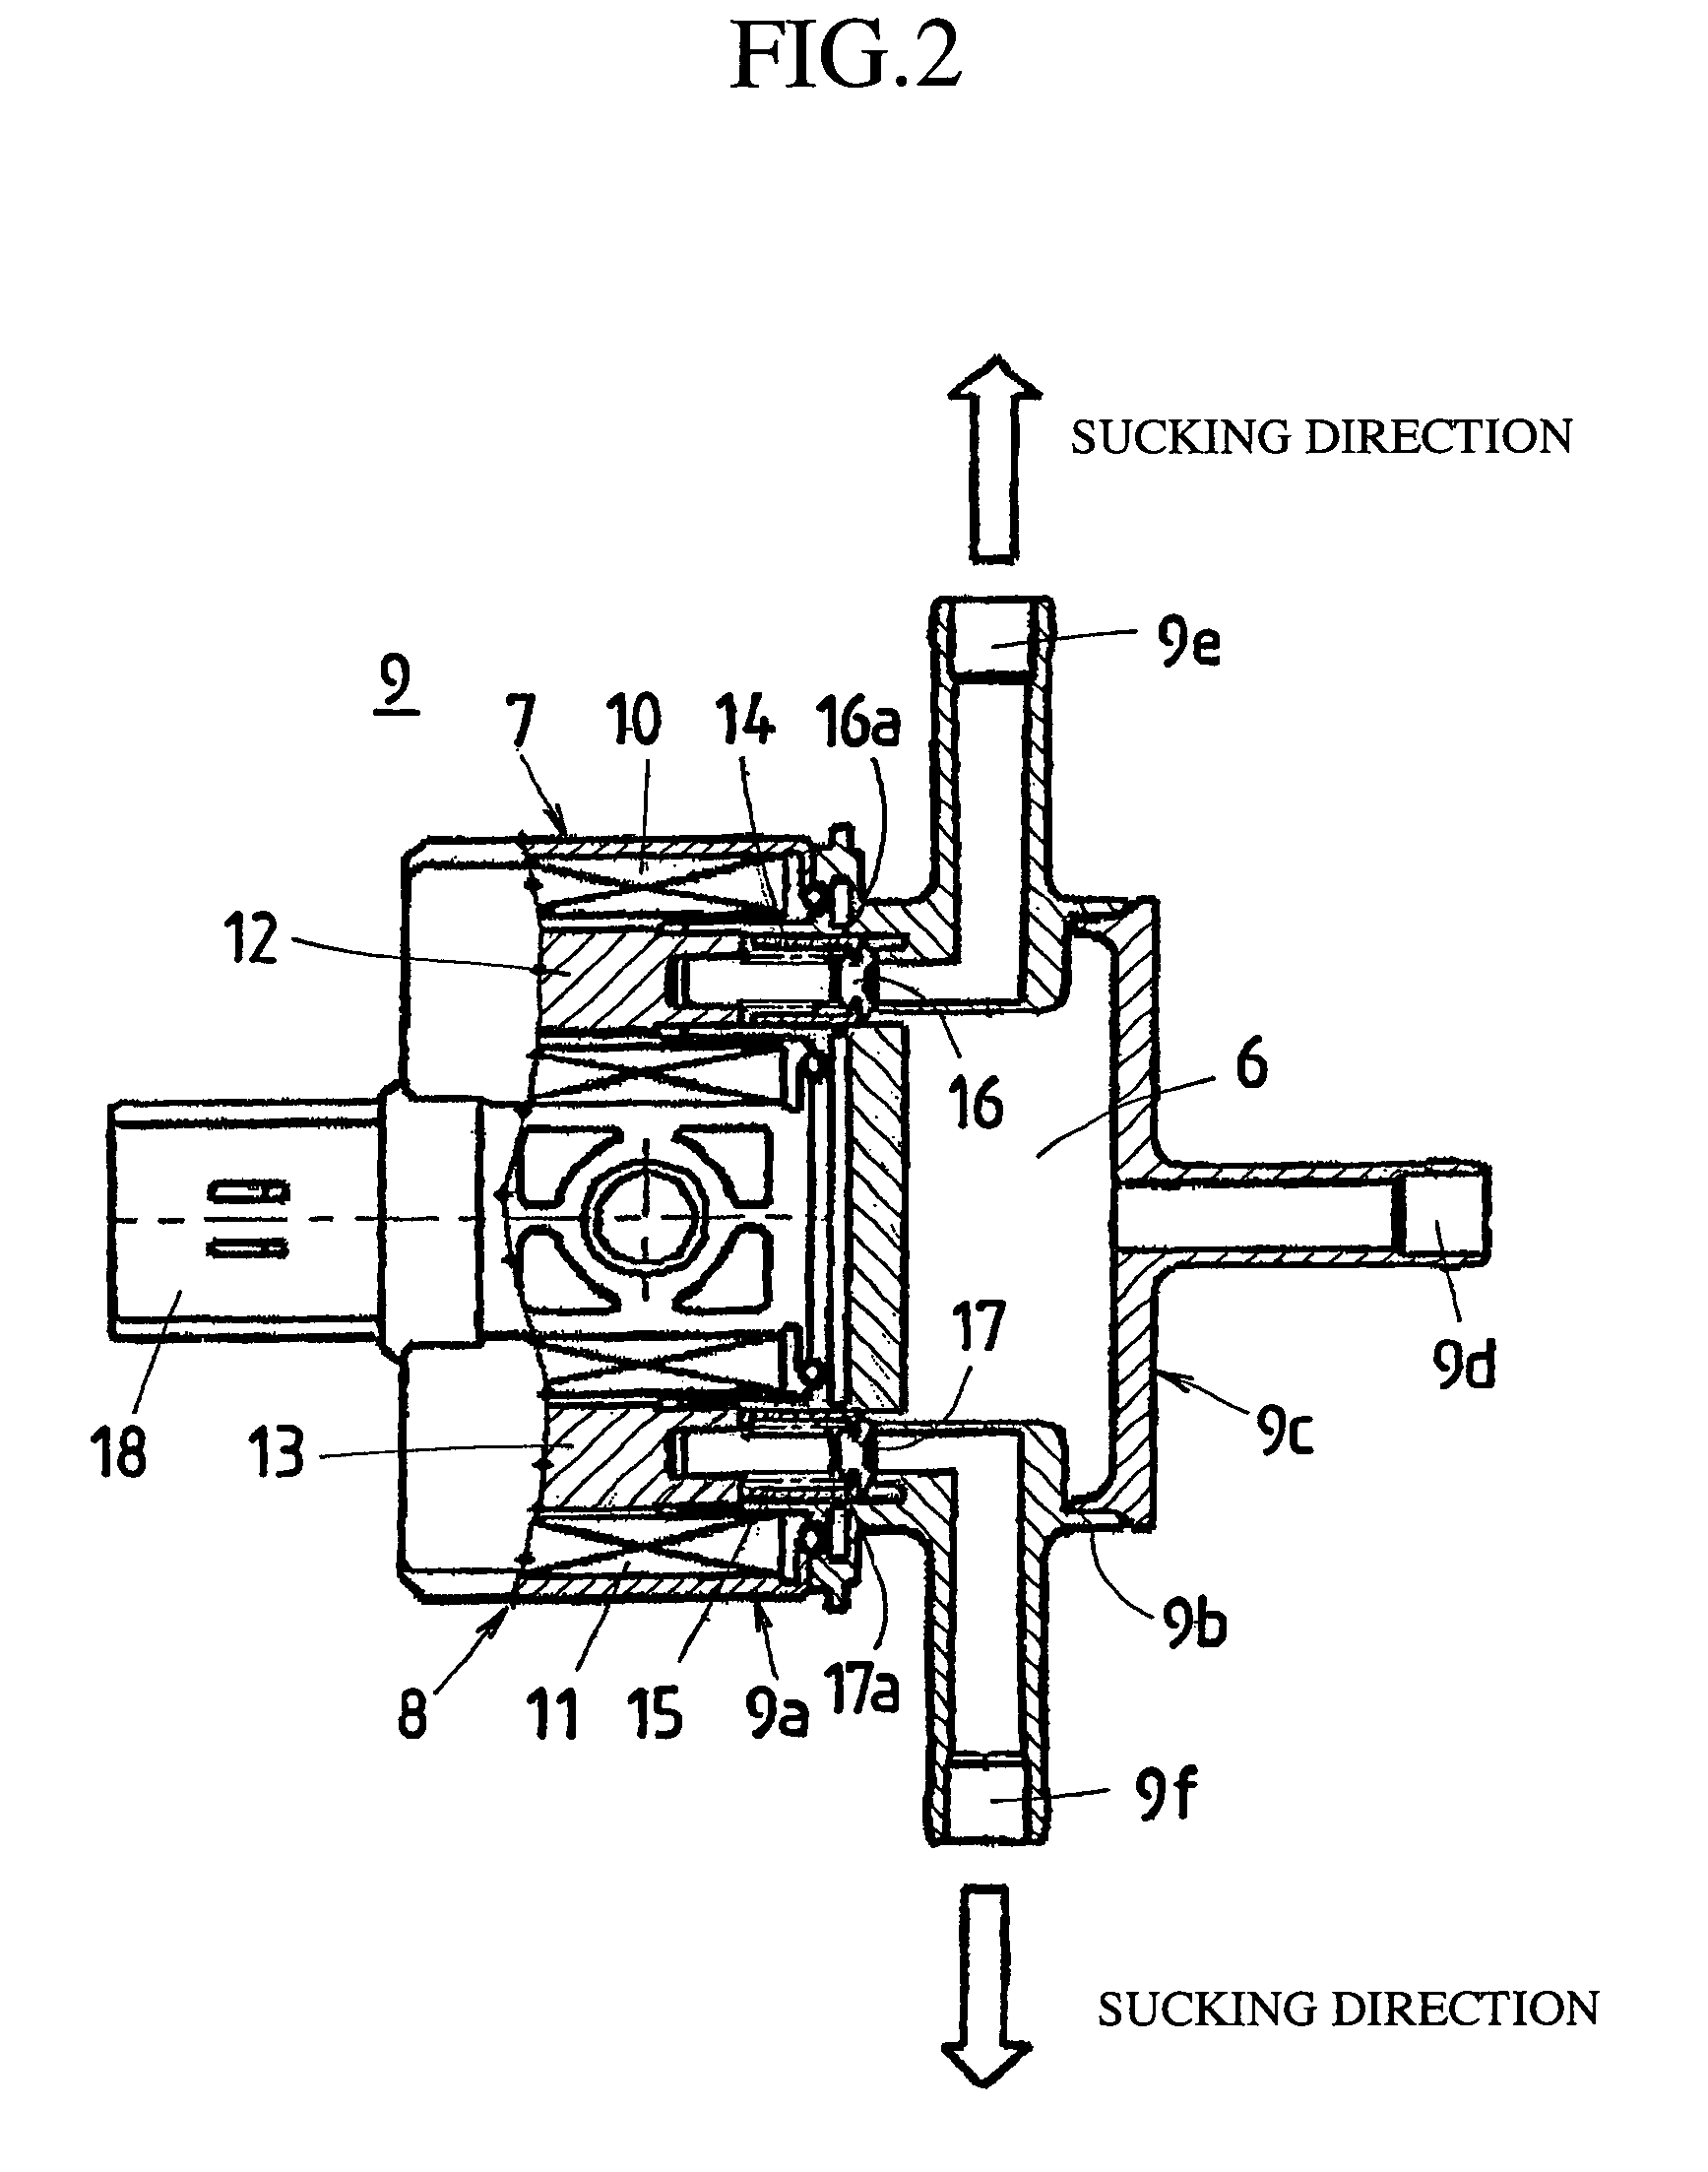 Fuel-evaporated gas processing system and electromagnetic valve device